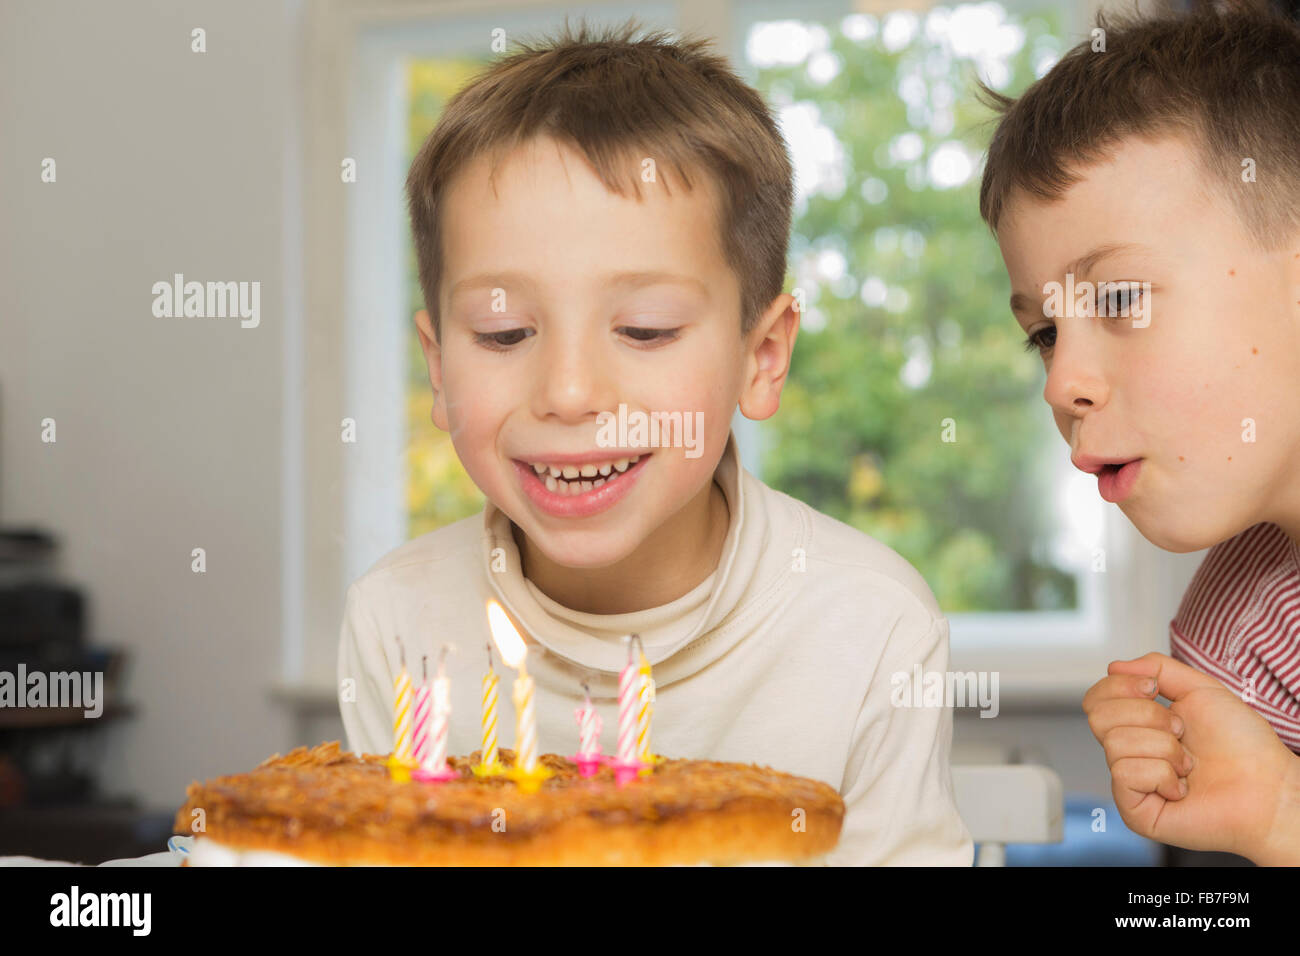 Boy looking at brother blowing birthday candles Stock Photo